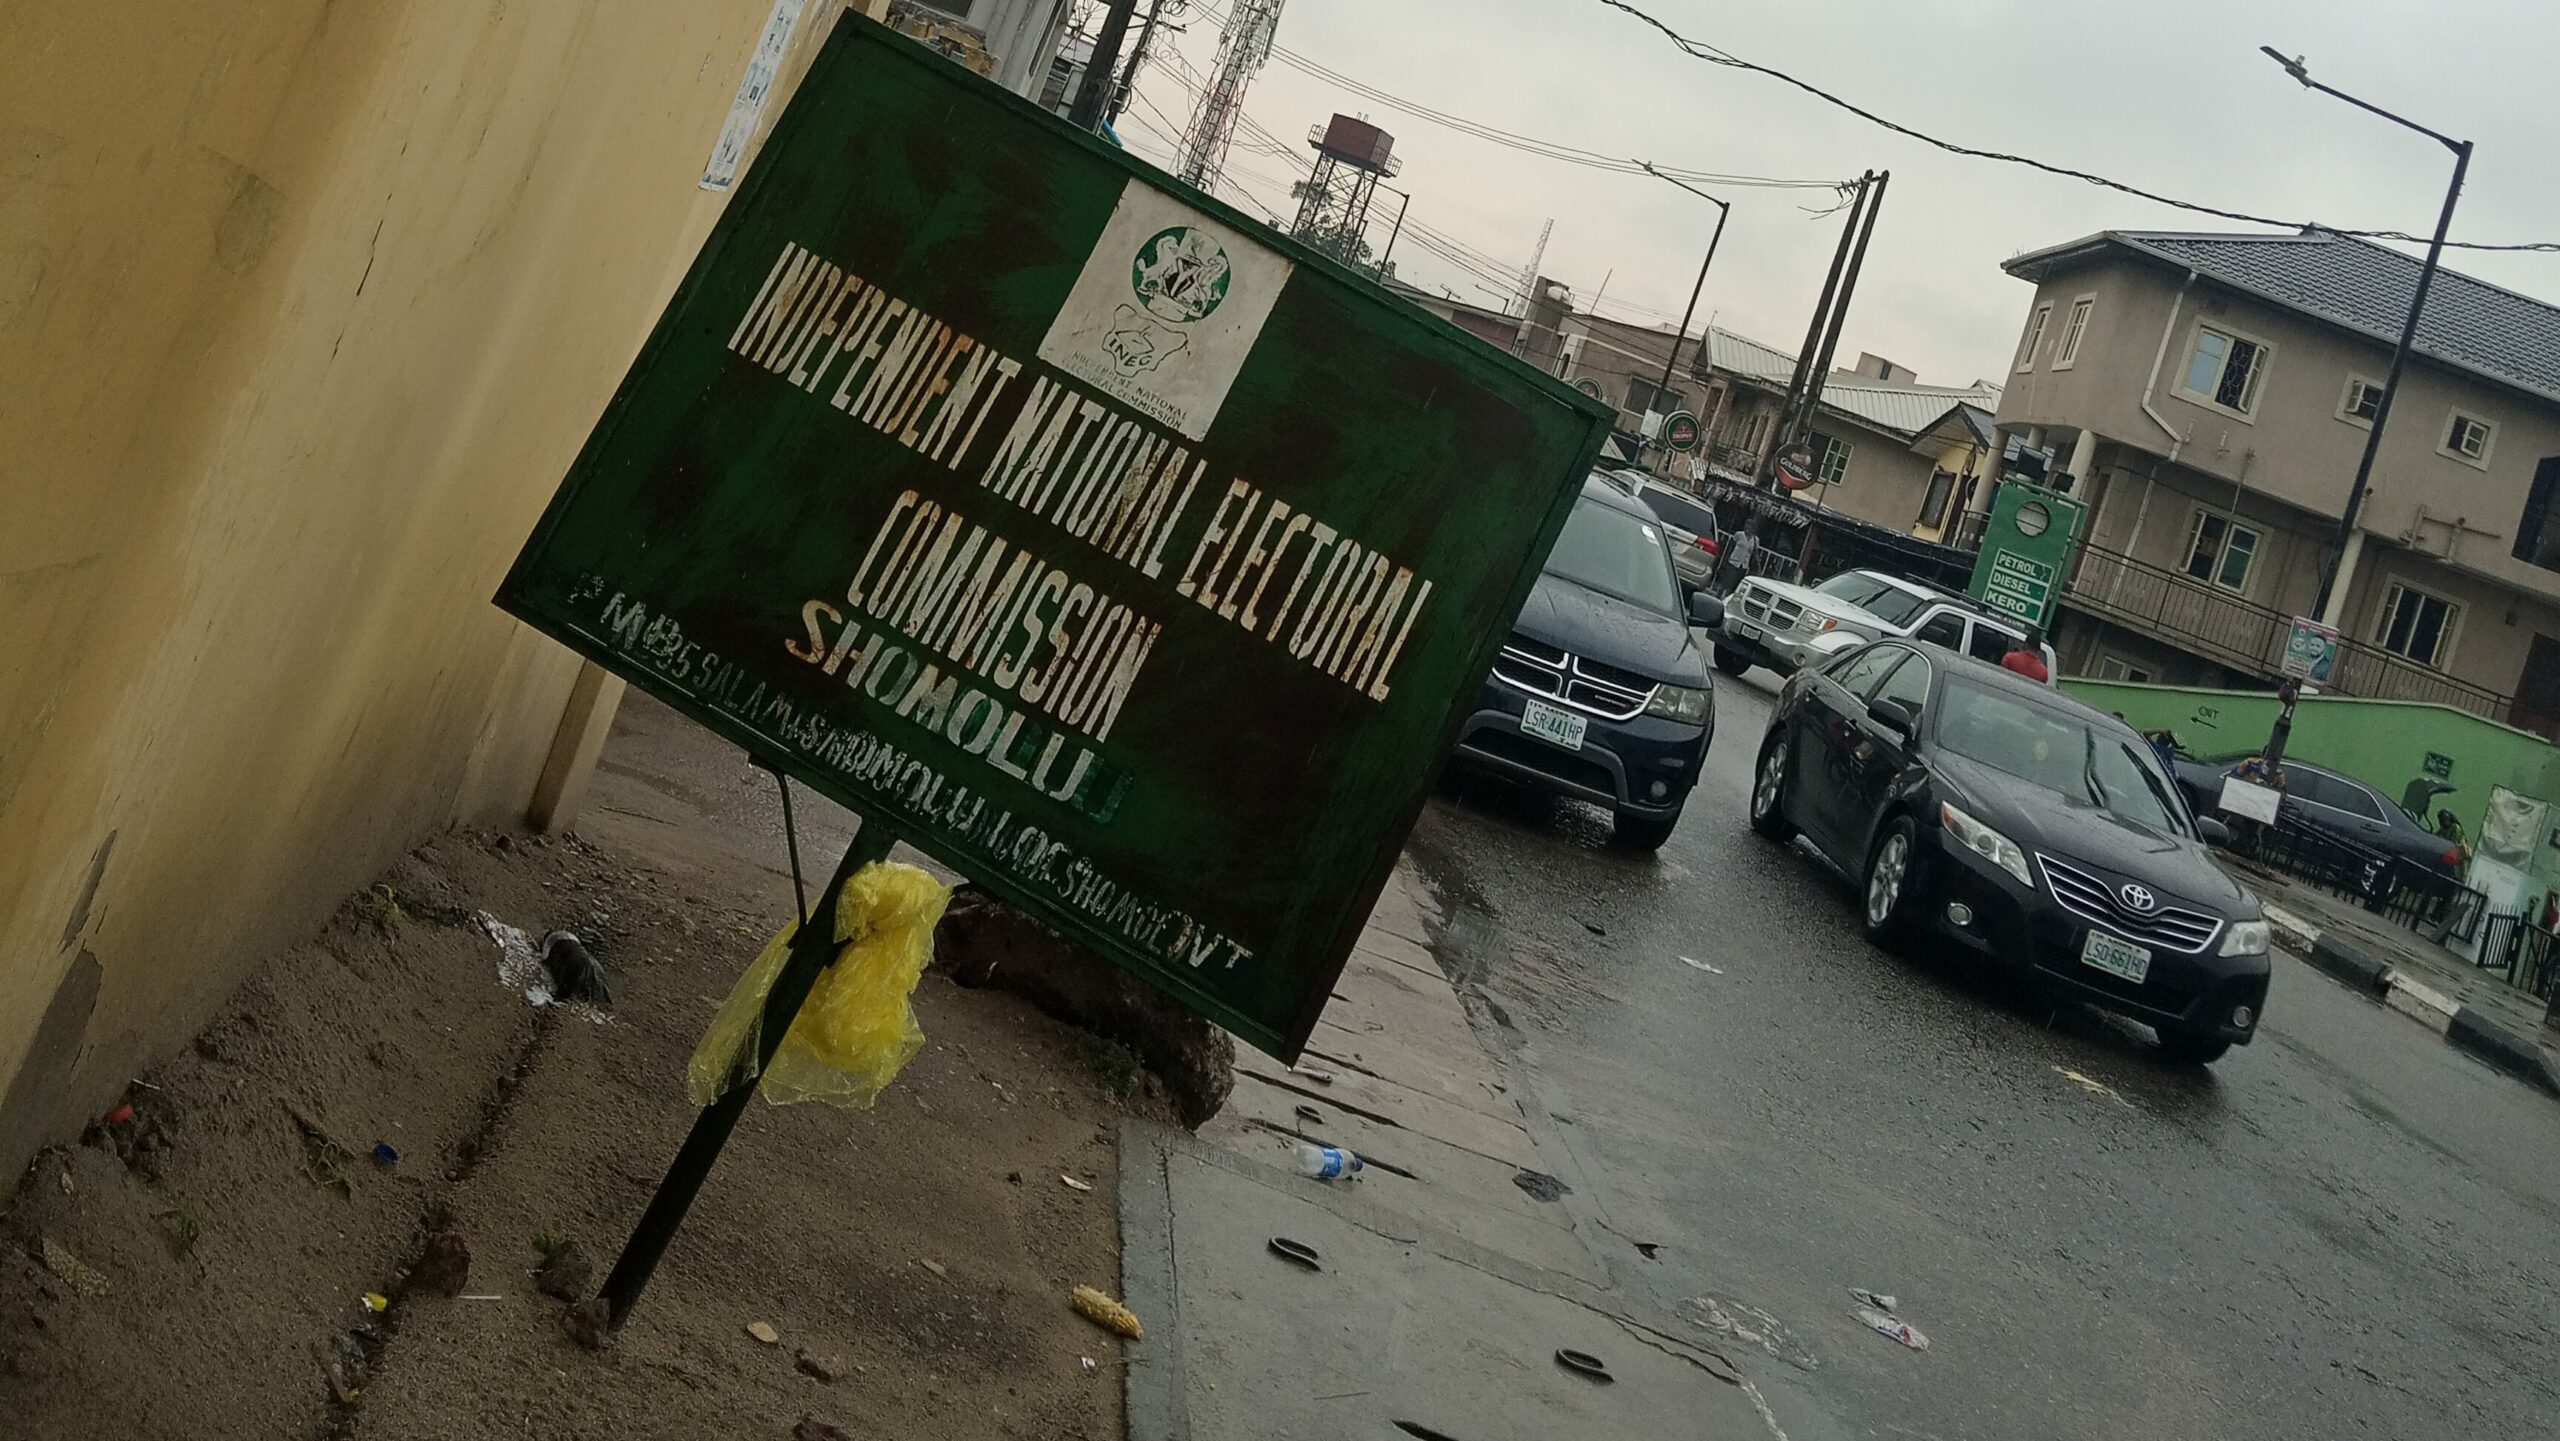 Signpost of the INEC office in Shomolu